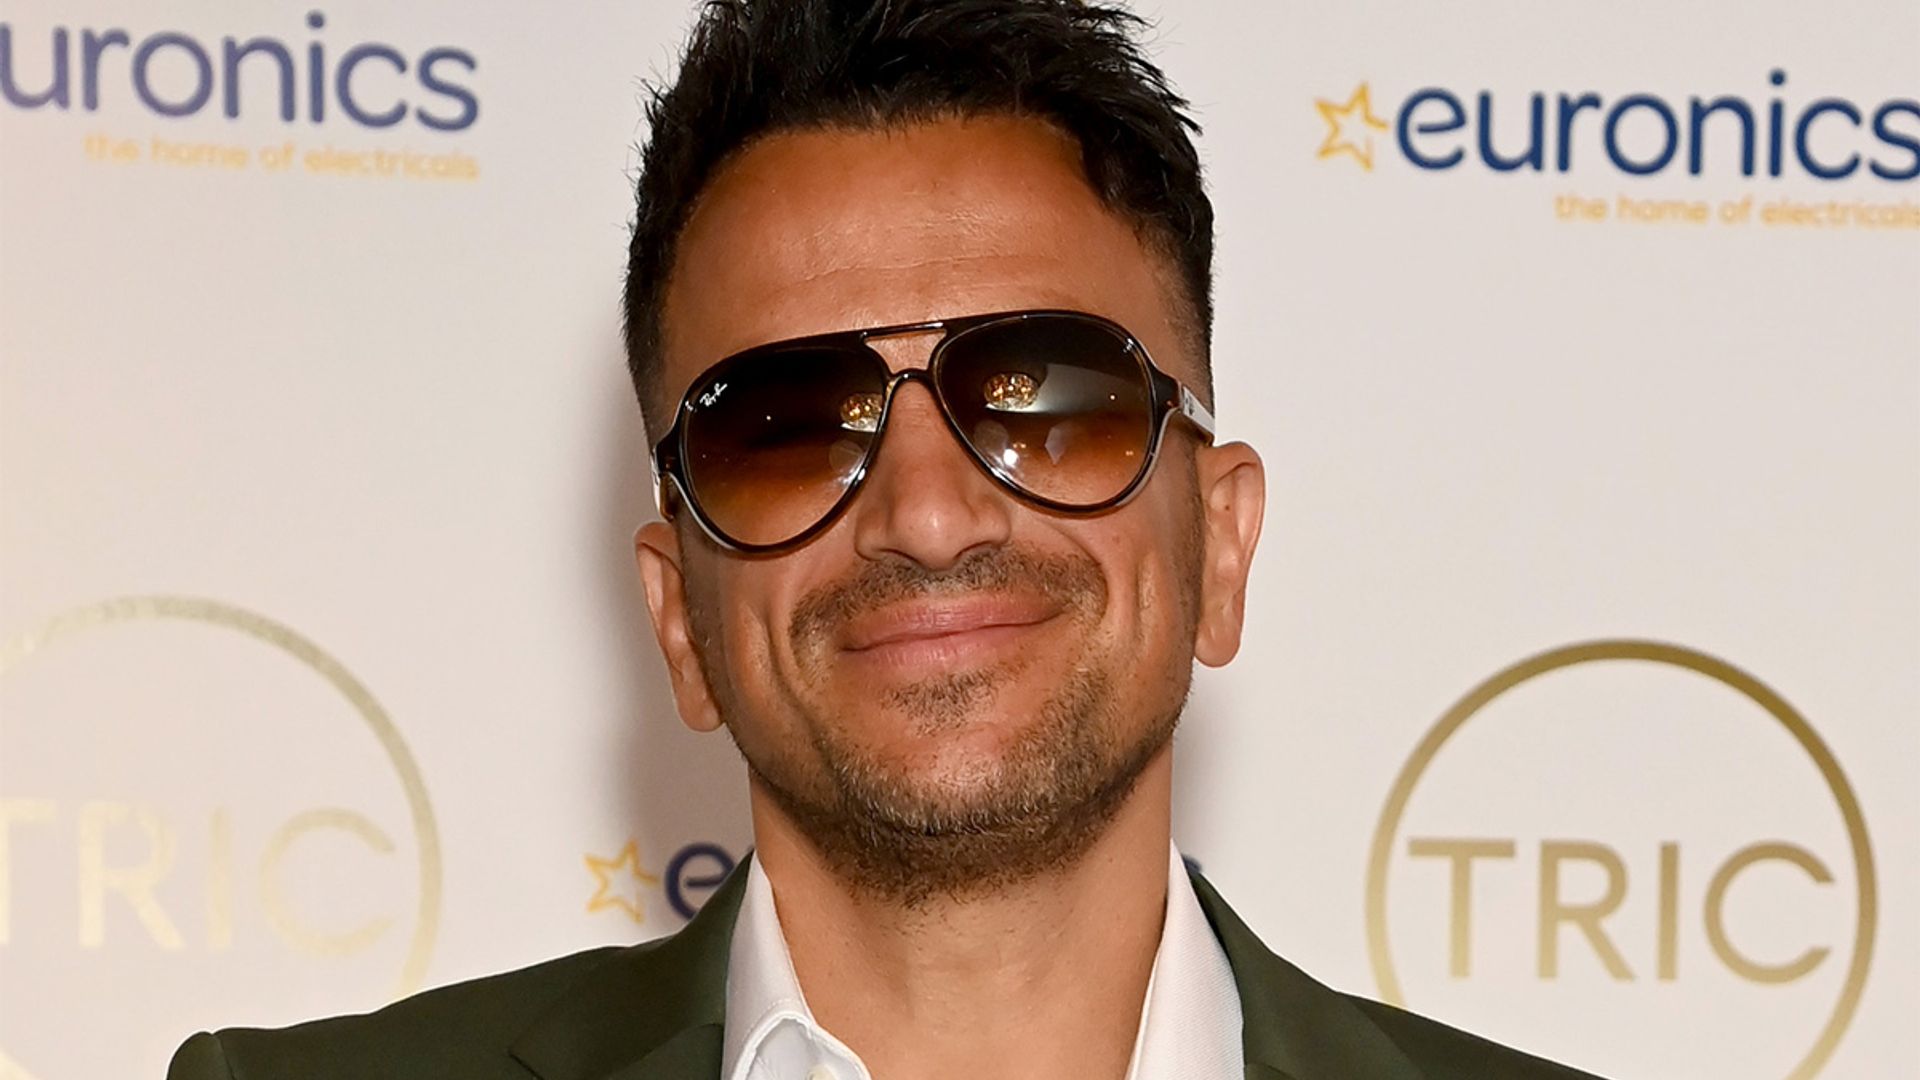 Peter Andre shares adorable update of Junior and Princess - and they look so grown up